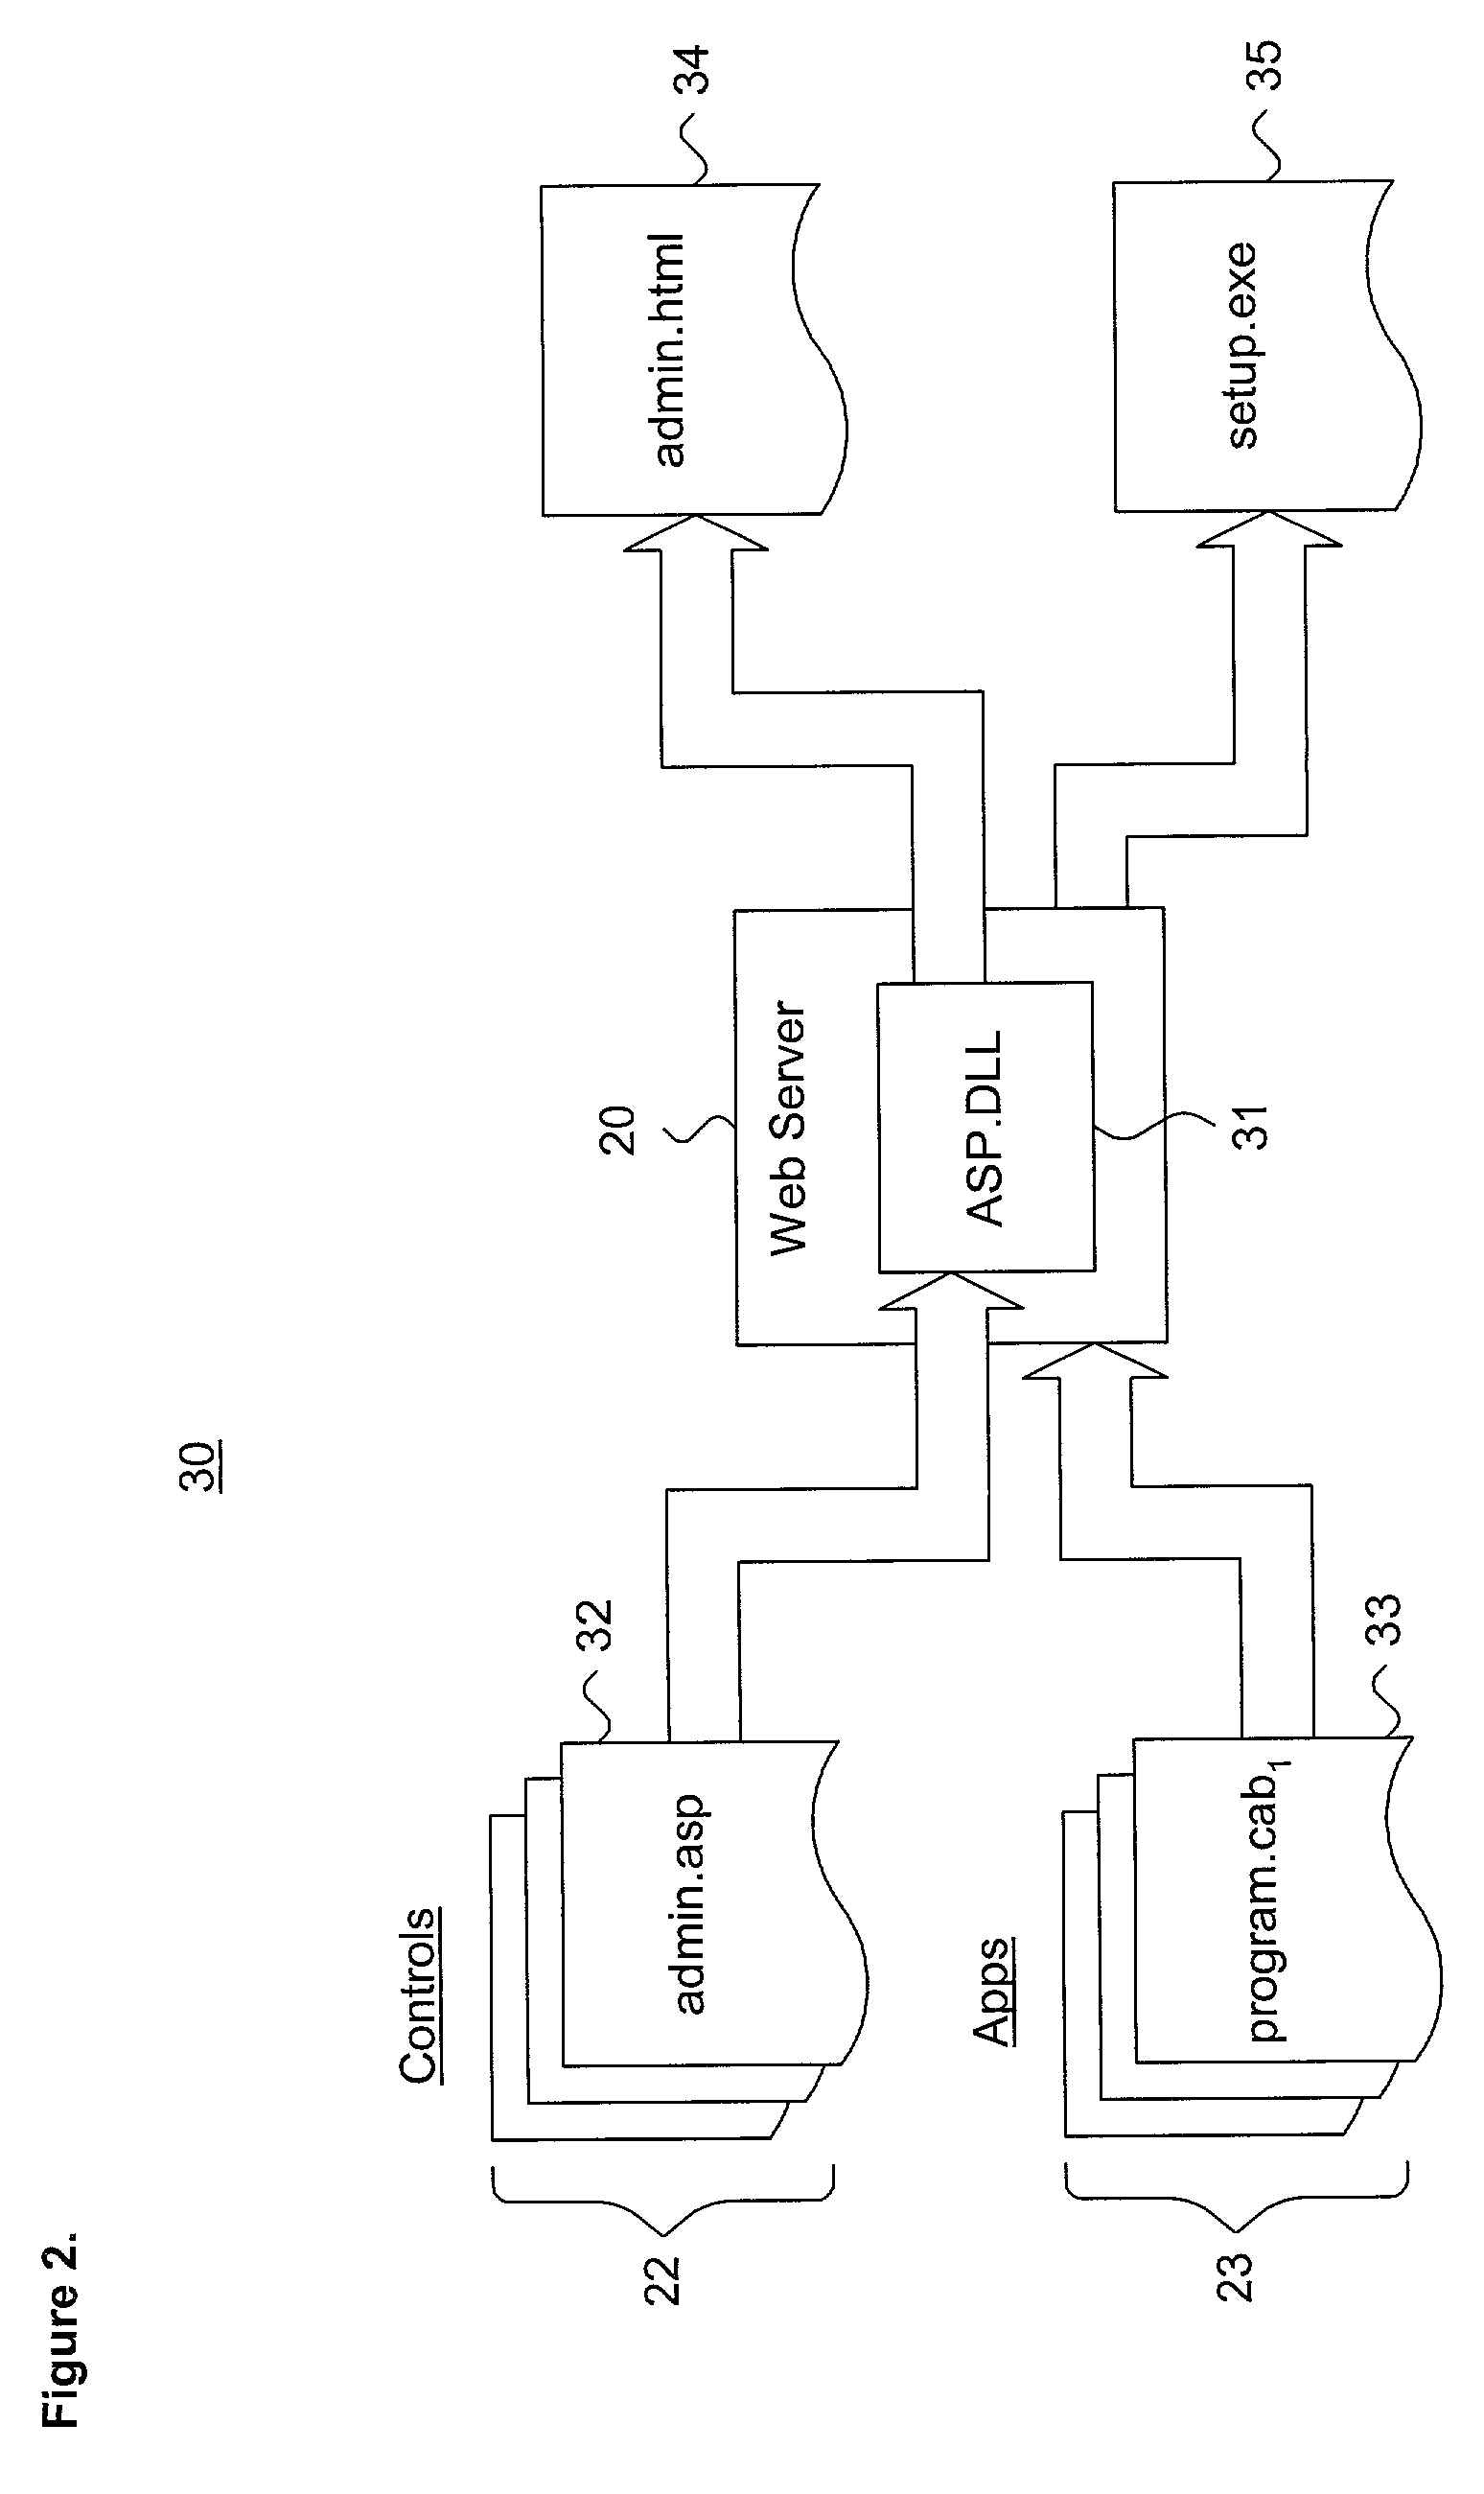 System and method for providing web-based remote security application client administration in a distributed computing environment